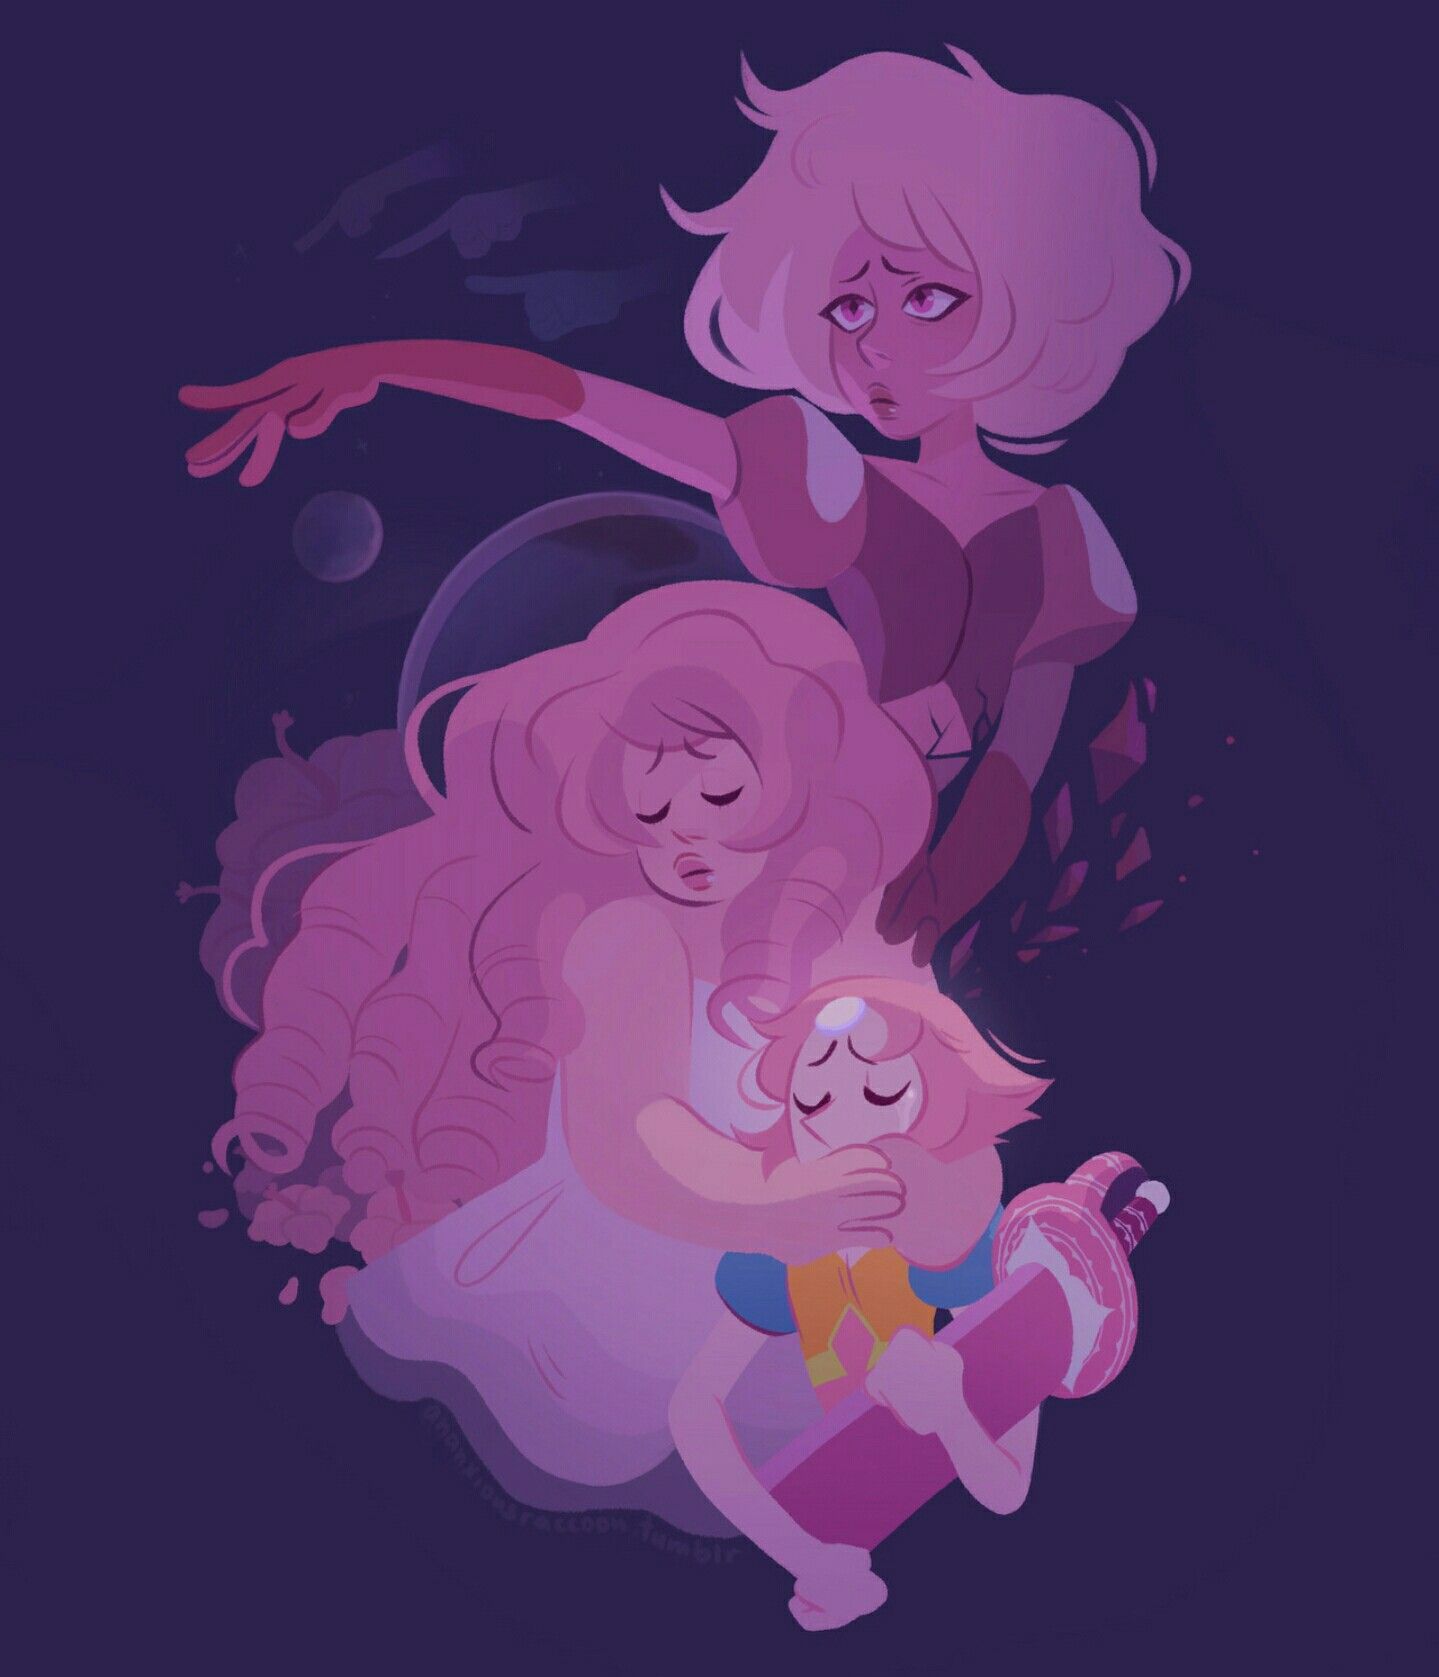 Pink diamond, pearl, and rose. Steven universe gem, Steven universe wallpaper, Steven universe comic